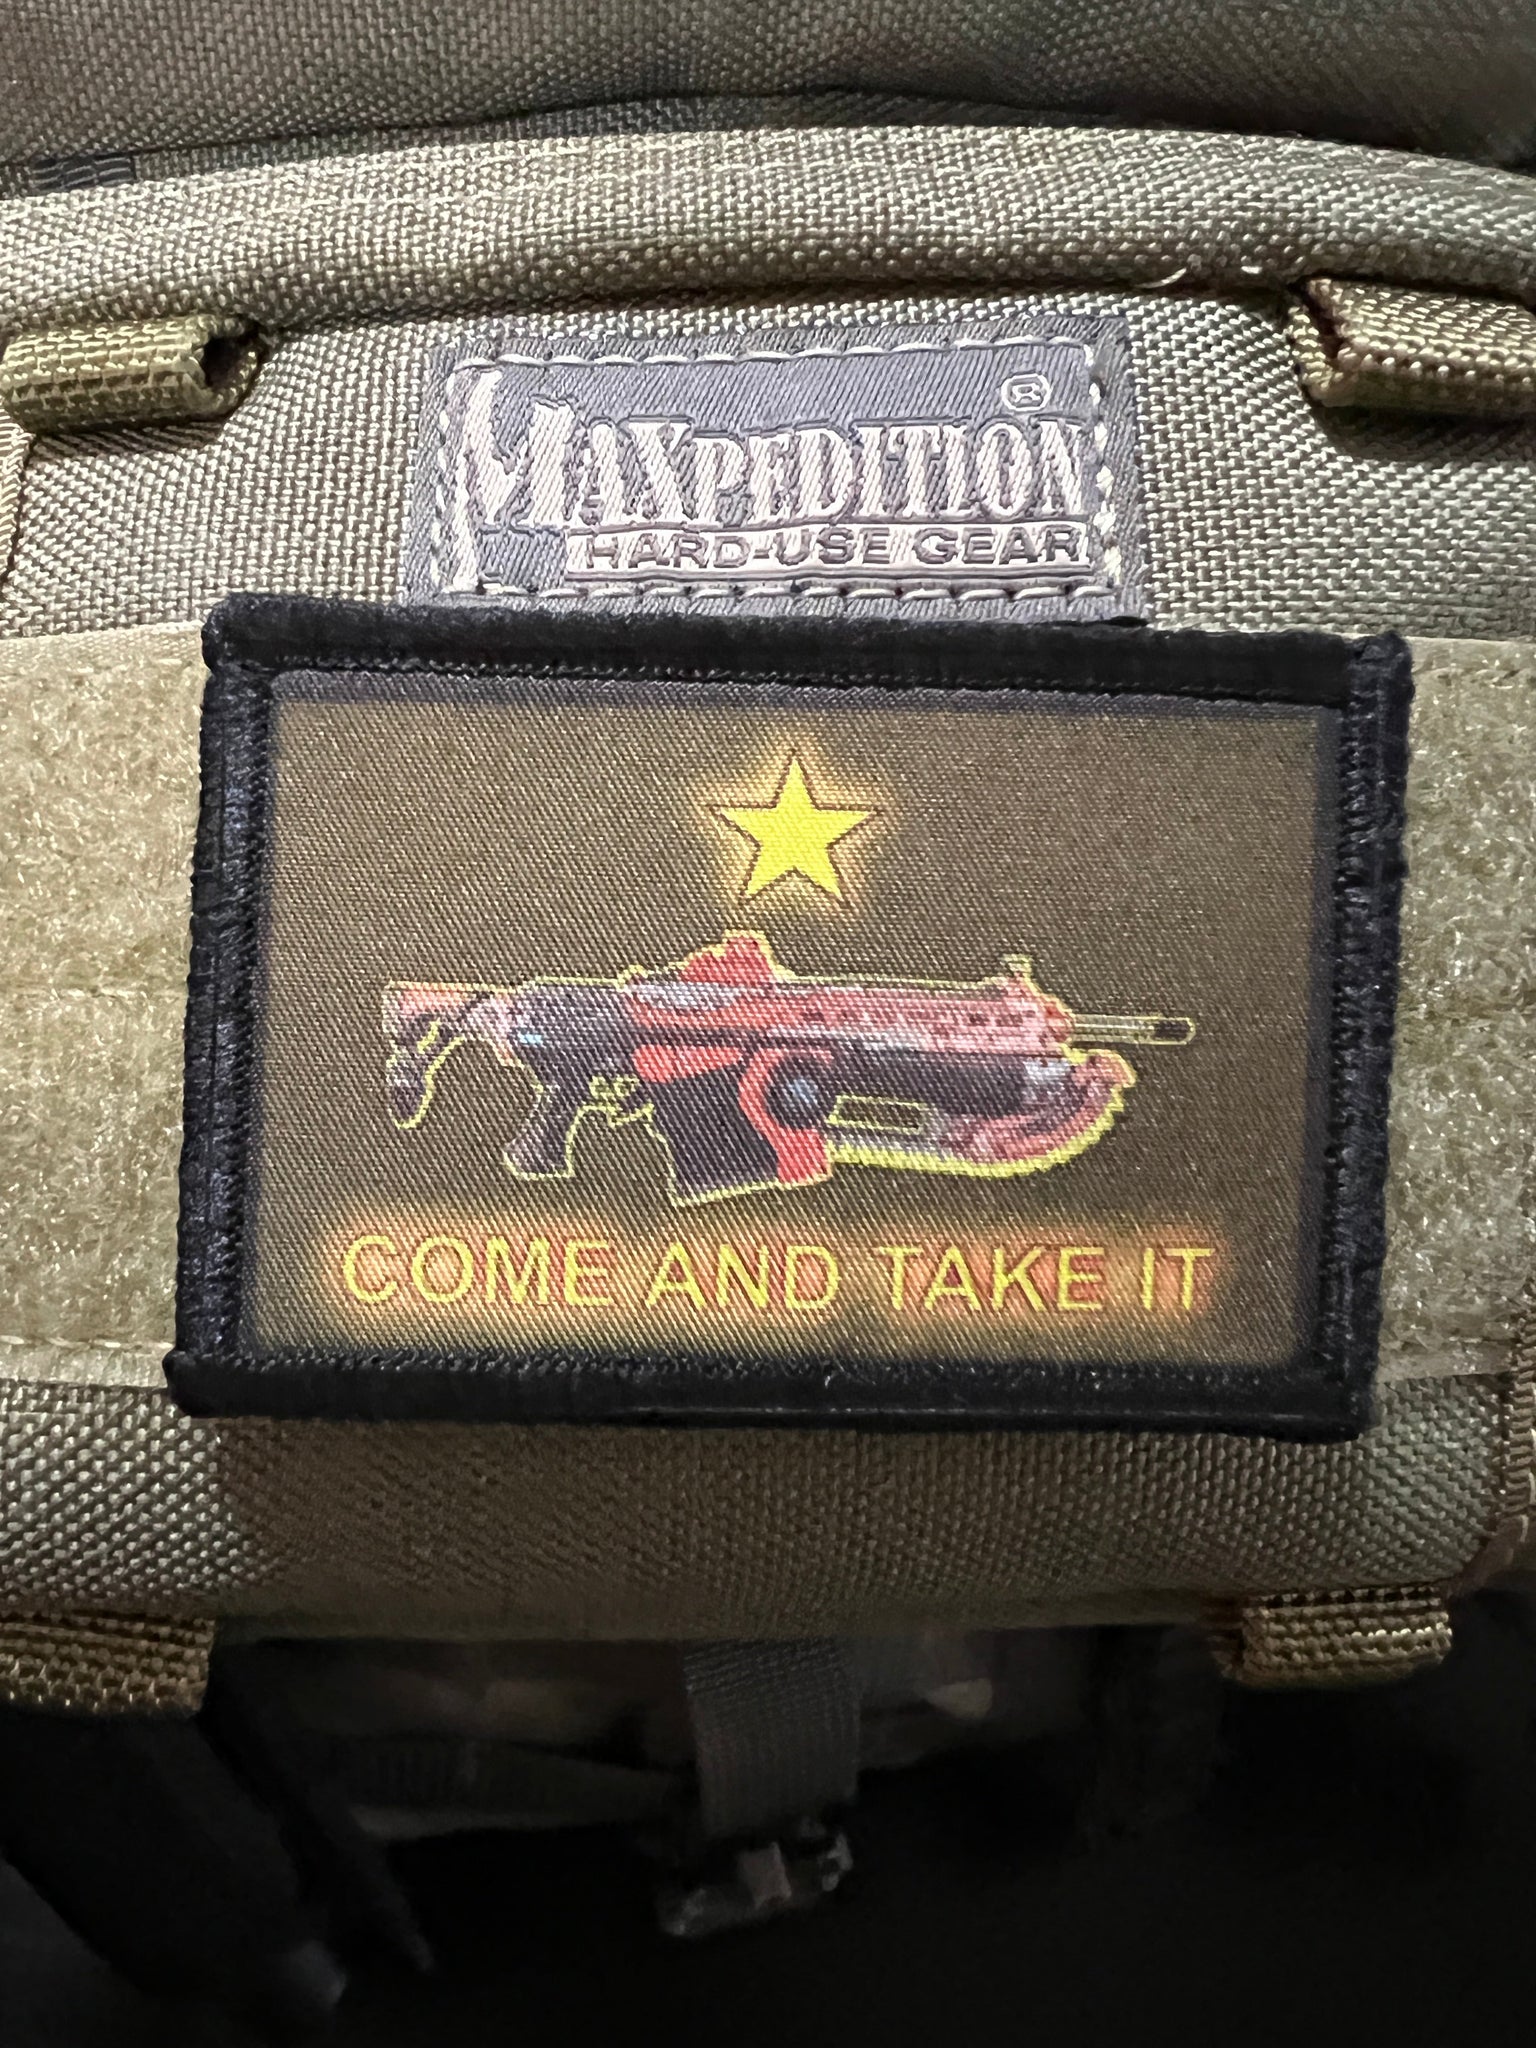 The best gear to display your velcro patches. 